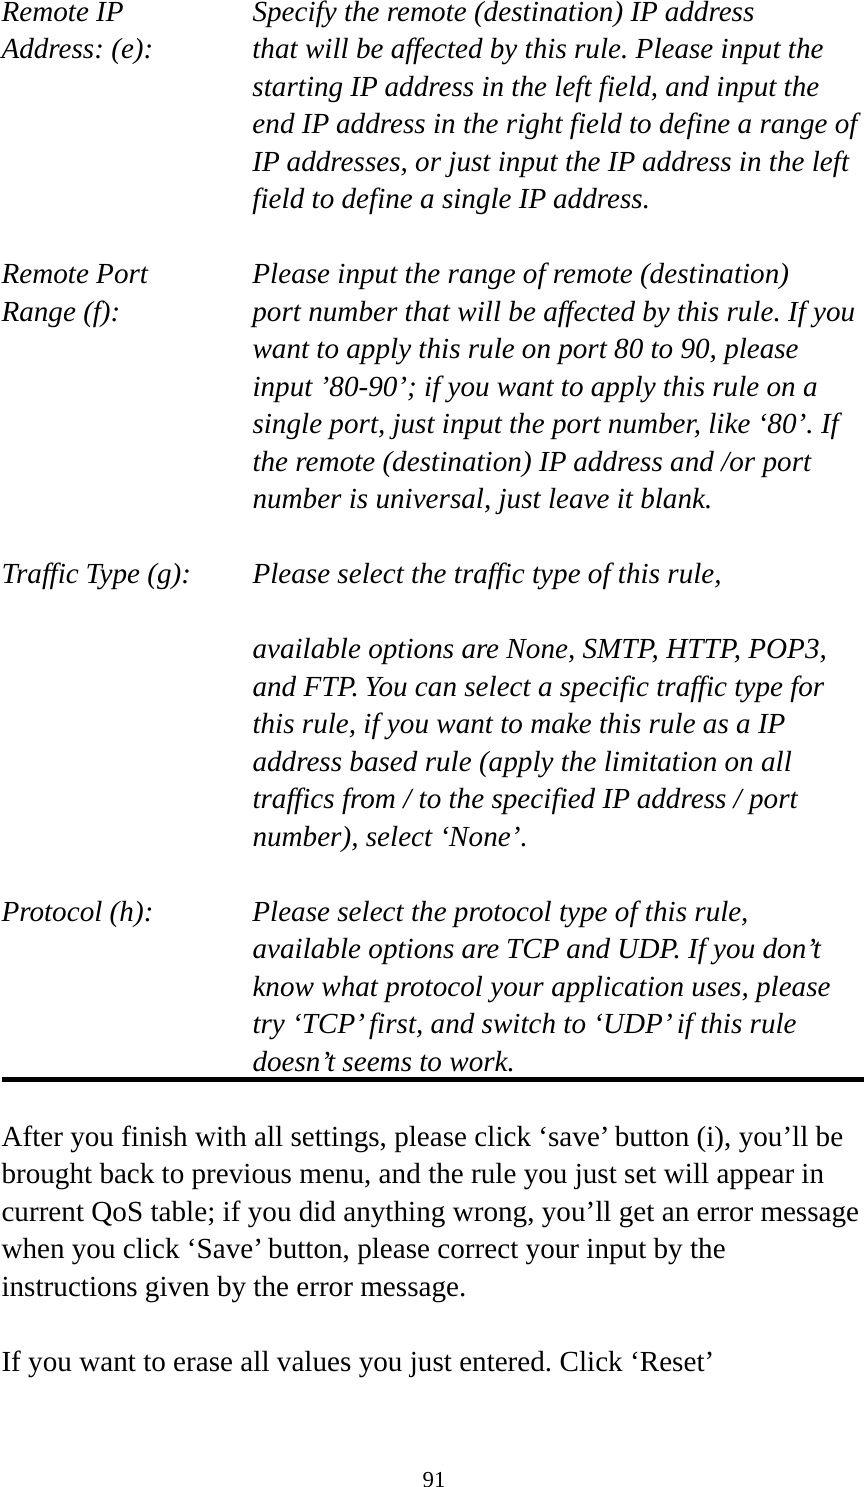 91 Remote IP        Specify the remote (destination) IP address Address: (e):    that will be affected by this rule. Please input the starting IP address in the left field, and input the end IP address in the right field to define a range of IP addresses, or just input the IP address in the left field to define a single IP address.  Remote Port      Please input the range of remote (destination) Range (f):  port number that will be affected by this rule. If you want to apply this rule on port 80 to 90, please input ’80-90’; if you want to apply this rule on a single port, just input the port number, like ‘80’. If the remote (destination) IP address and /or port number is universal, just leave it blank.  Traffic Type (g):    Please select the traffic type of this rule,  available options are None, SMTP, HTTP, POP3, and FTP. You can select a specific traffic type for this rule, if you want to make this rule as a IP address based rule (apply the limitation on all traffics from / to the specified IP address / port number), select ‘None’.  Protocol (h):      Please select the protocol type of this rule,   available options are TCP and UDP. If you don’t know what protocol your application uses, please try ‘TCP’ first, and switch to ‘UDP’ if this rule doesn’t seems to work.  After you finish with all settings, please click ‘save’ button (i), you’ll be brought back to previous menu, and the rule you just set will appear in current QoS table; if you did anything wrong, you’ll get an error message when you click ‘Save’ button, please correct your input by the instructions given by the error message.  If you want to erase all values you just entered. Click ‘Reset’ 